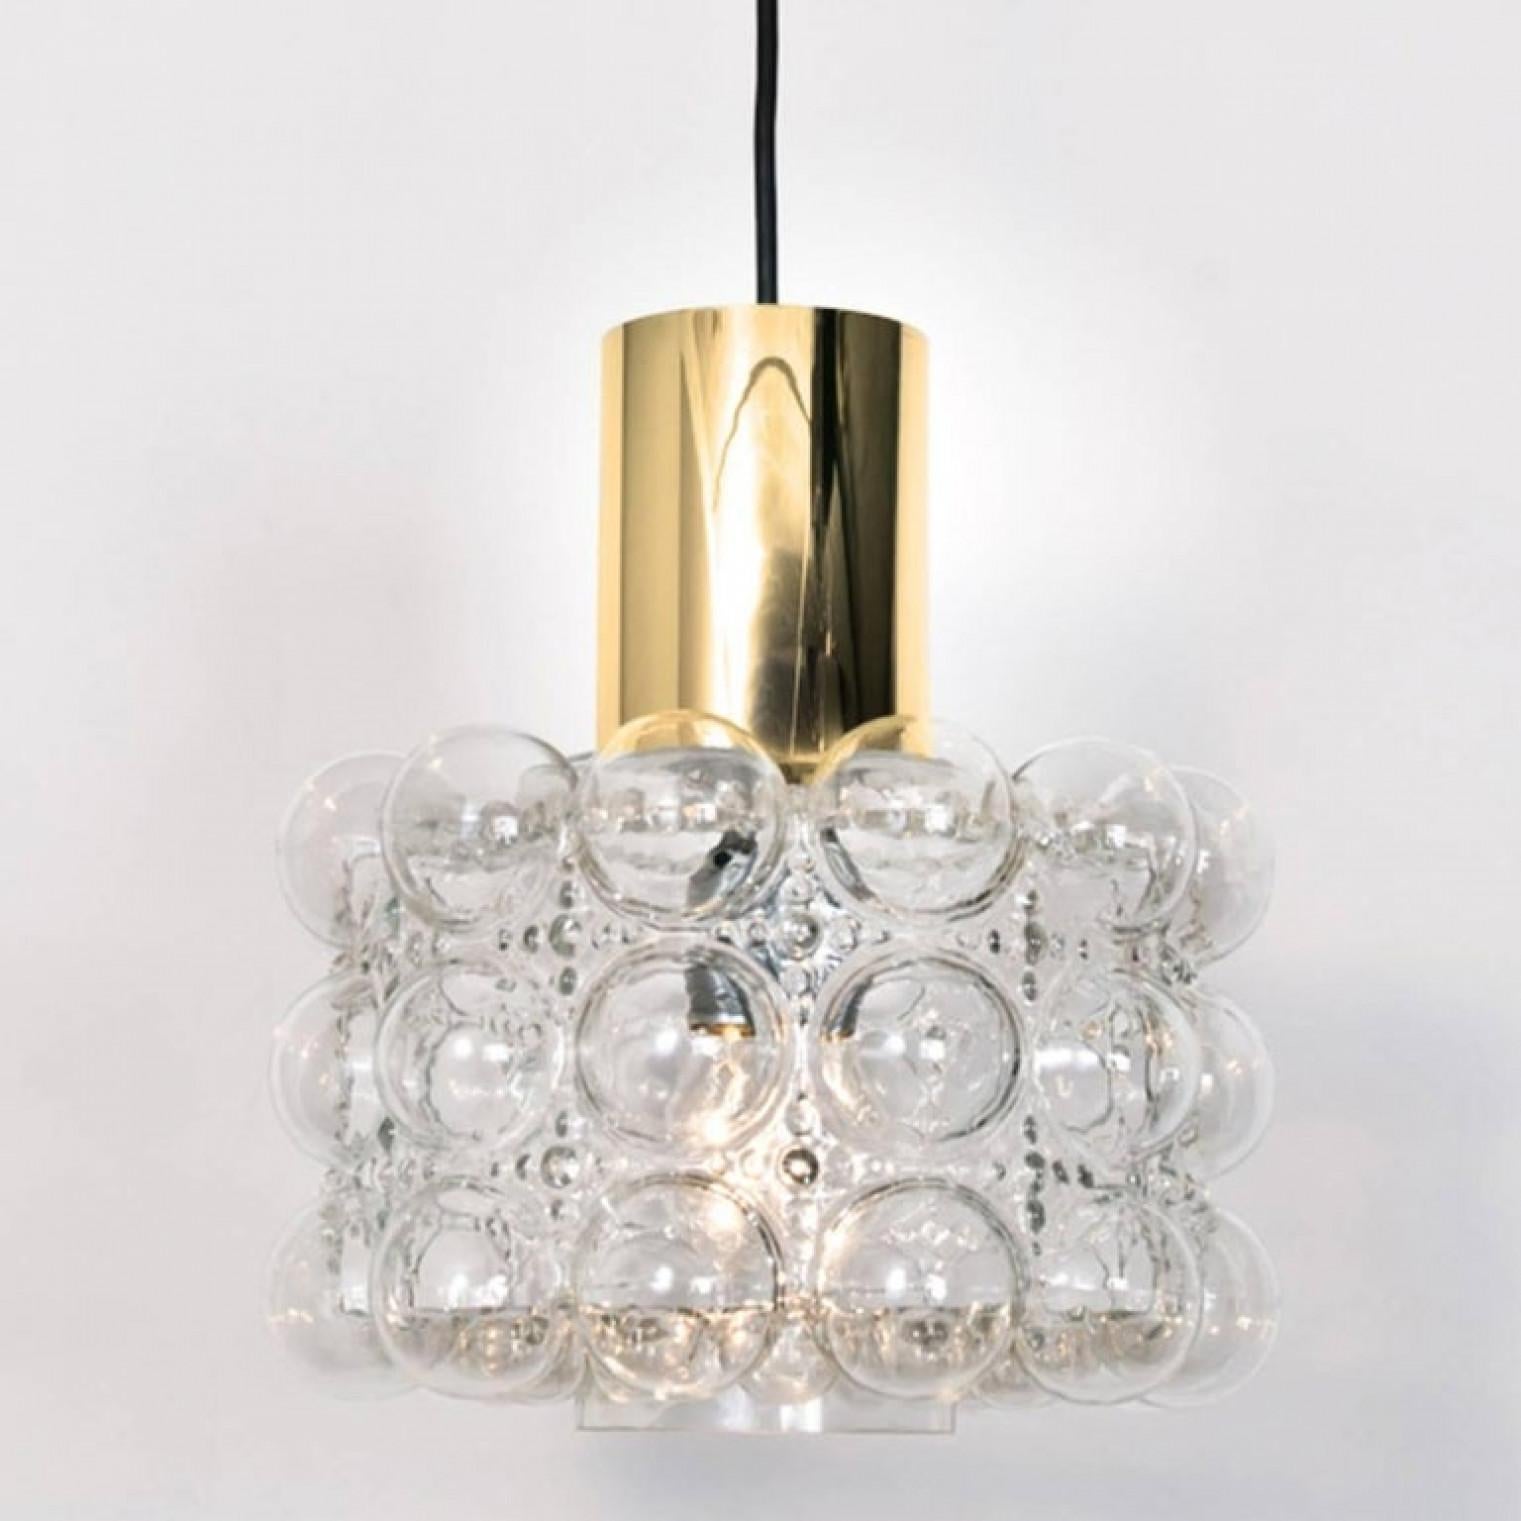 Pair of Beautiful Bubble Glass Pendant Lamps by Helena Tynell, 1960 In Excellent Condition For Sale In Rijssen, NL